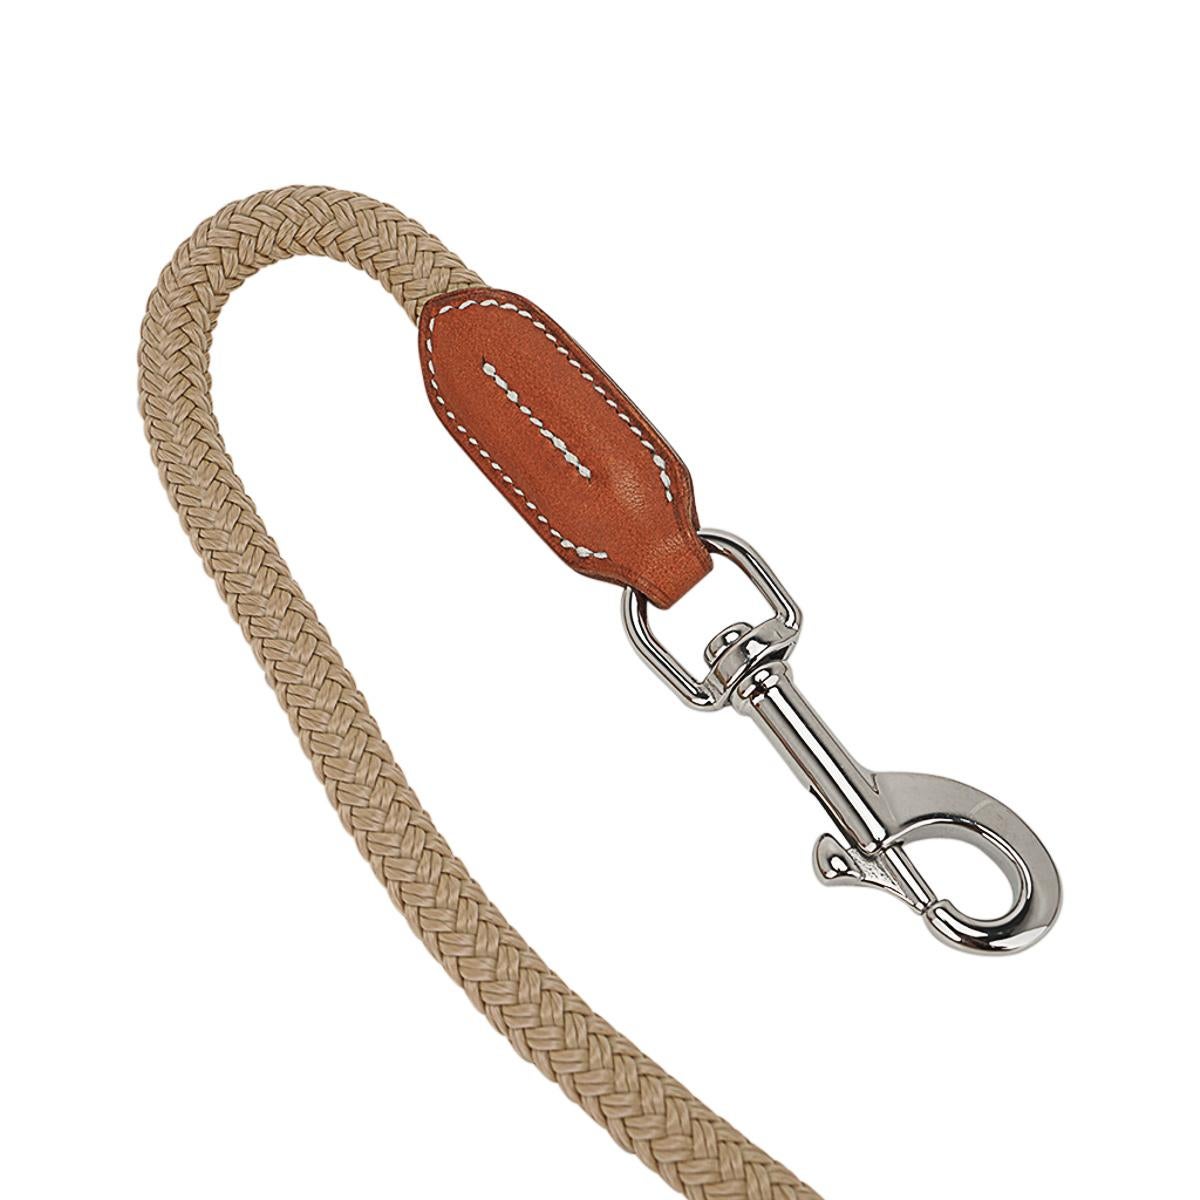 Mightychic offers an Hermes Gaucho Dog leash featured in Irish natural bridle leather.
Inspired by the lead rope for horses this fabulous leash will keep your canine
in lock step with fashion.
Saddle stitch detail and it also features codes and